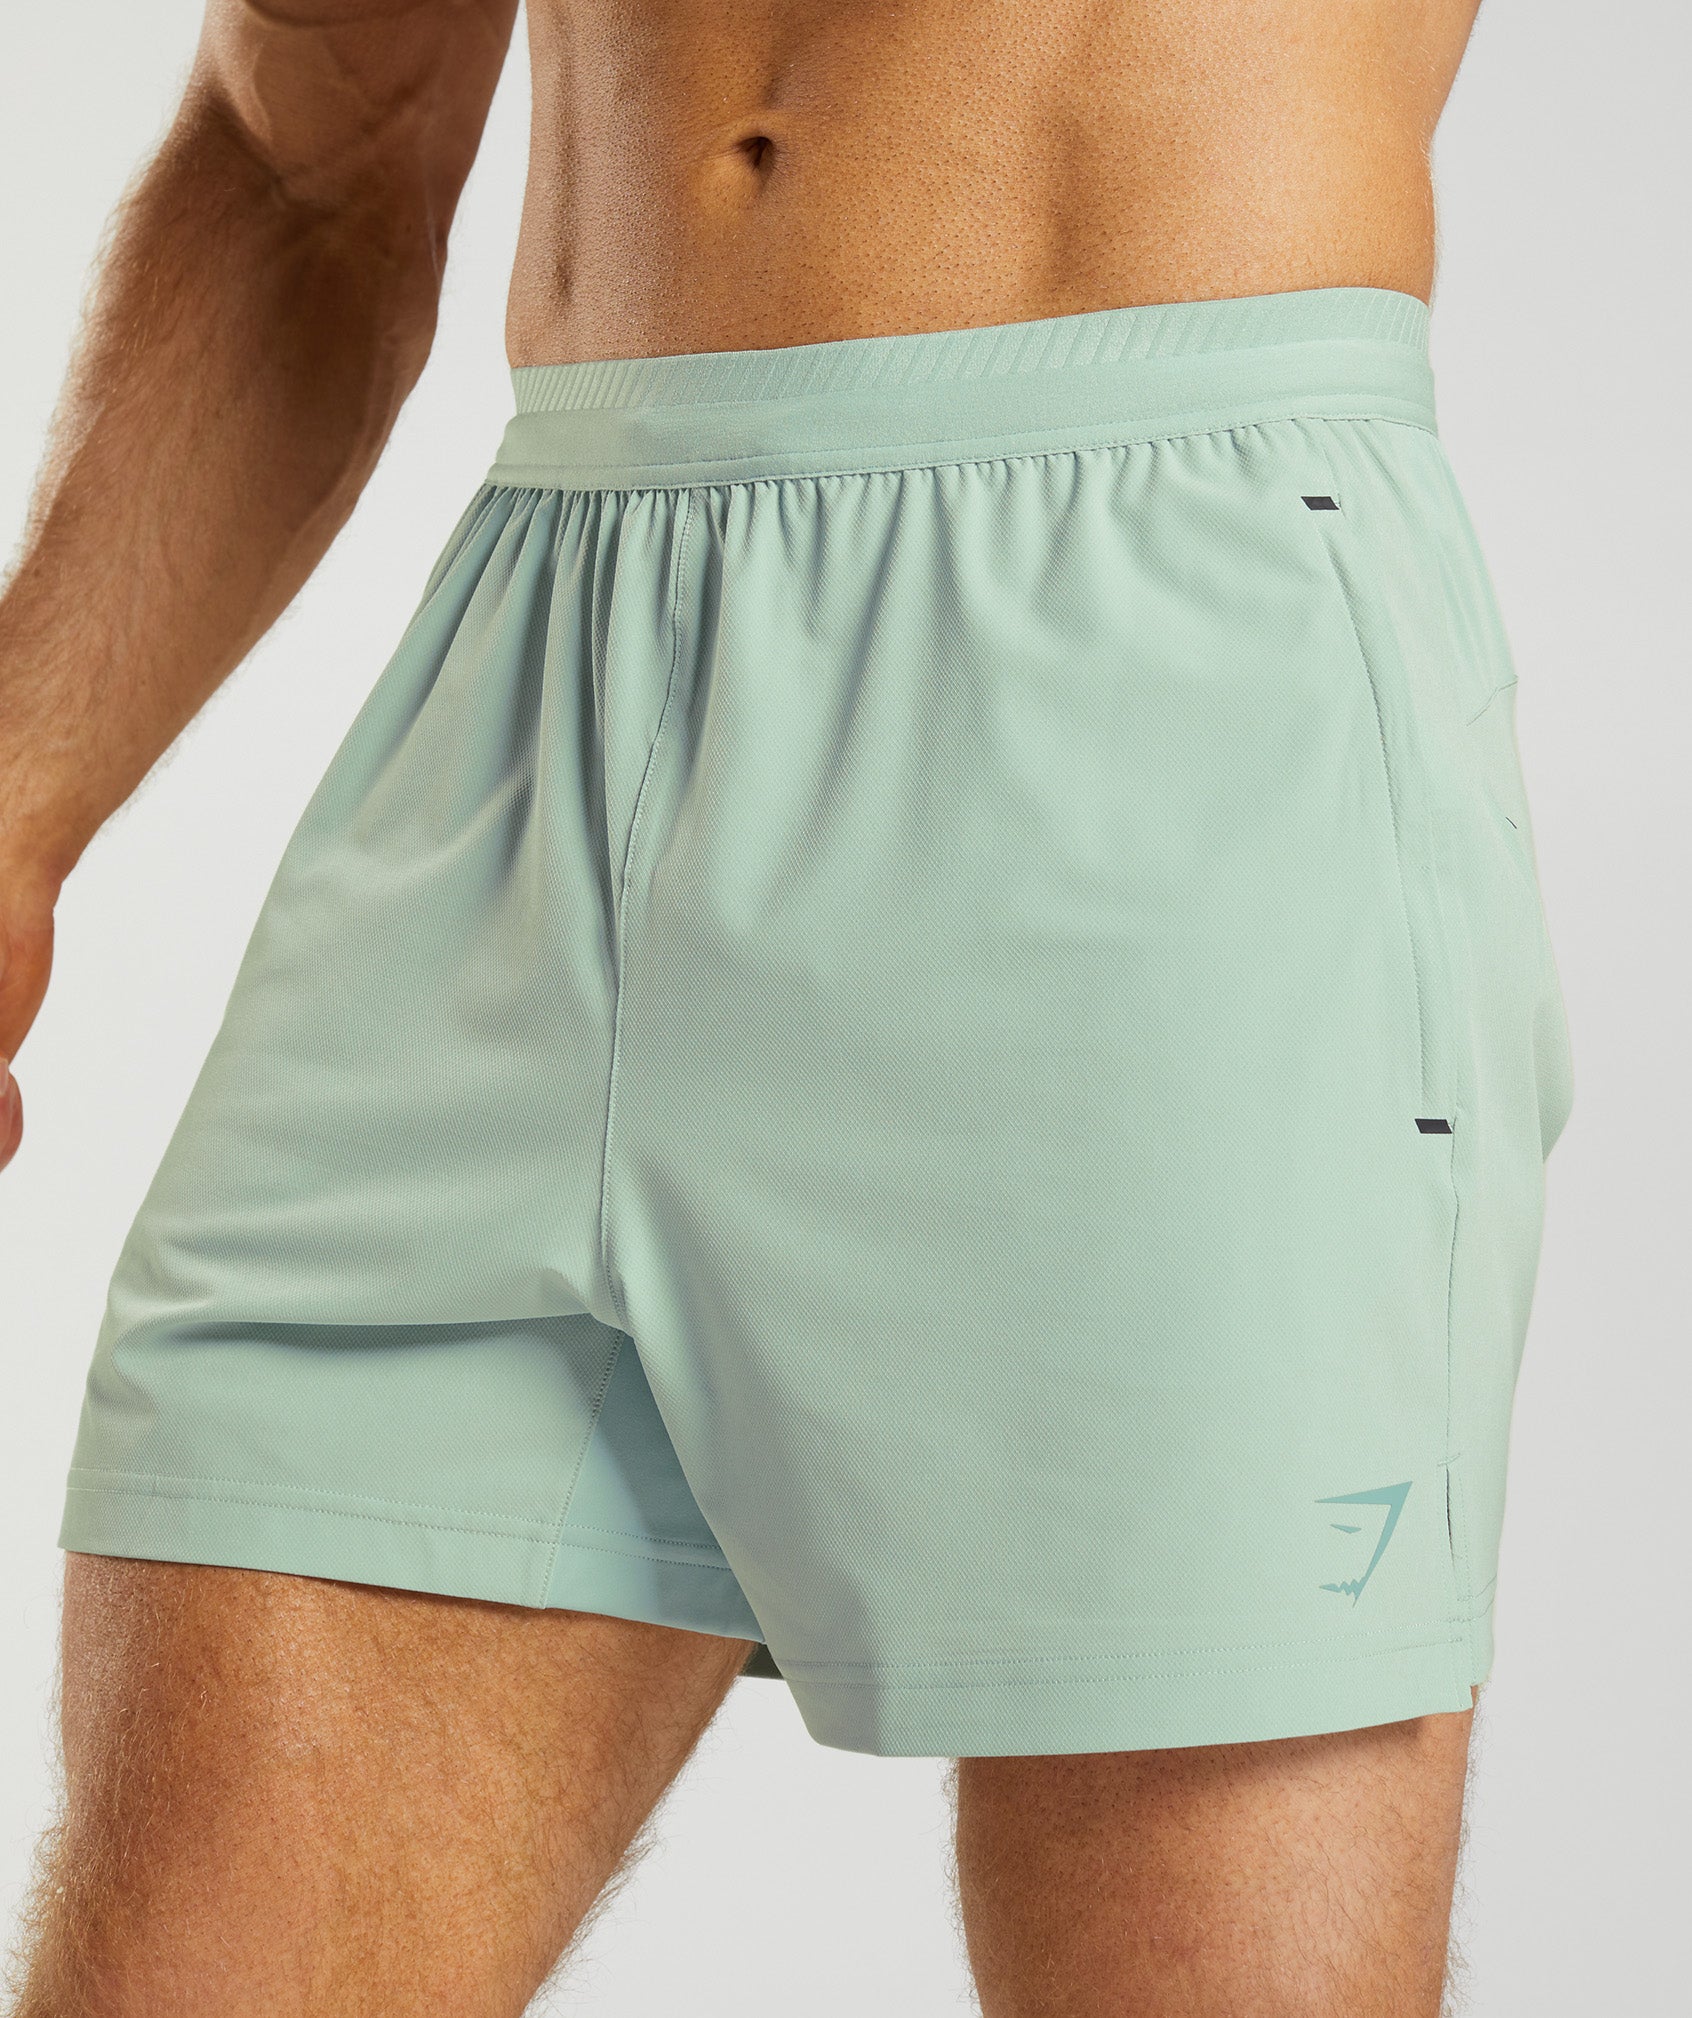 Apex 5" Hybrid Shorts in Frost Teal